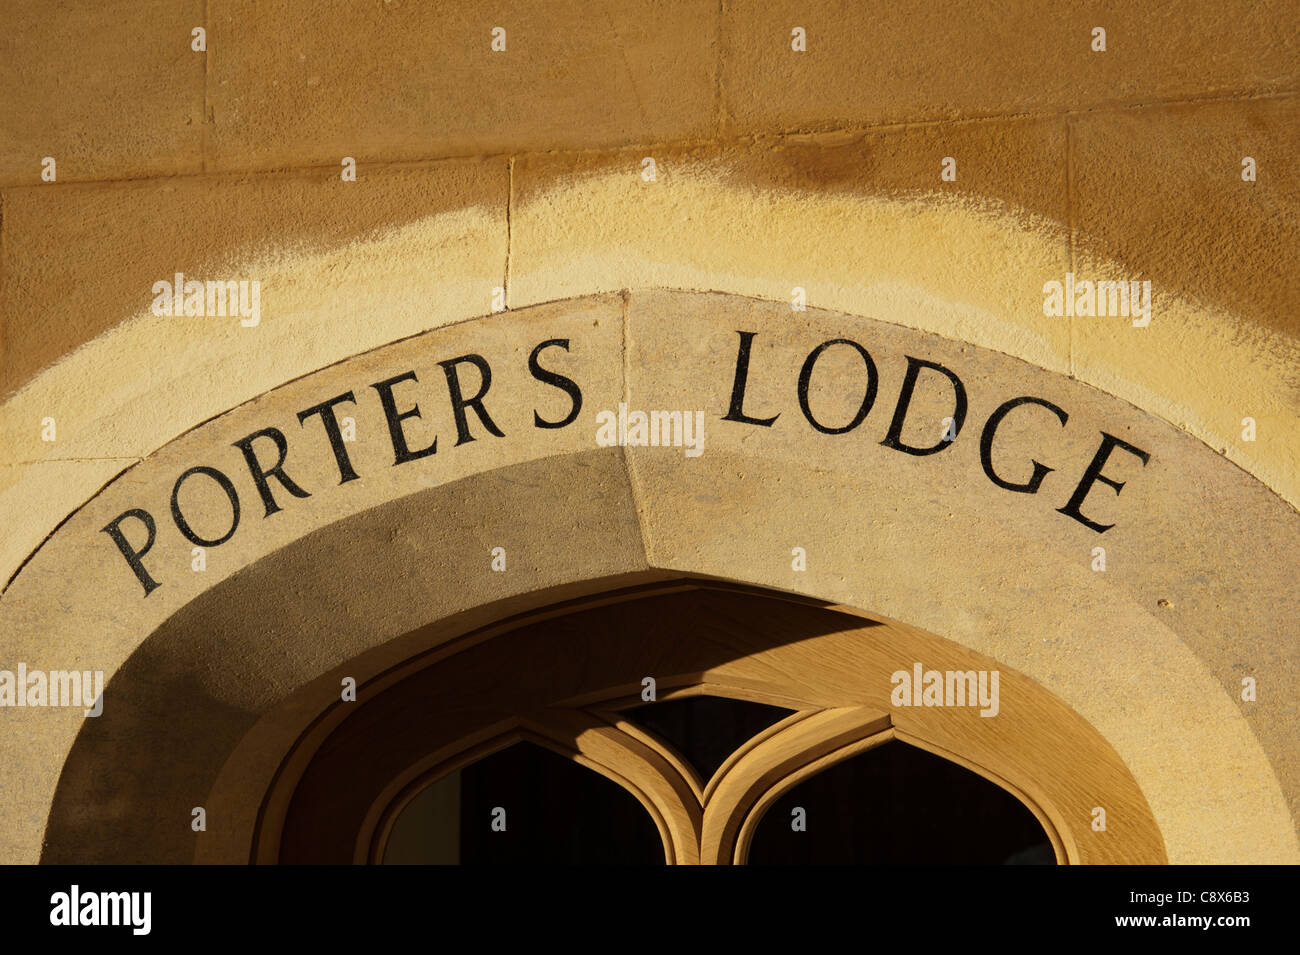 Porters Lodge sign in stone archway at Trinity College Cambridge England UK Stock Photo